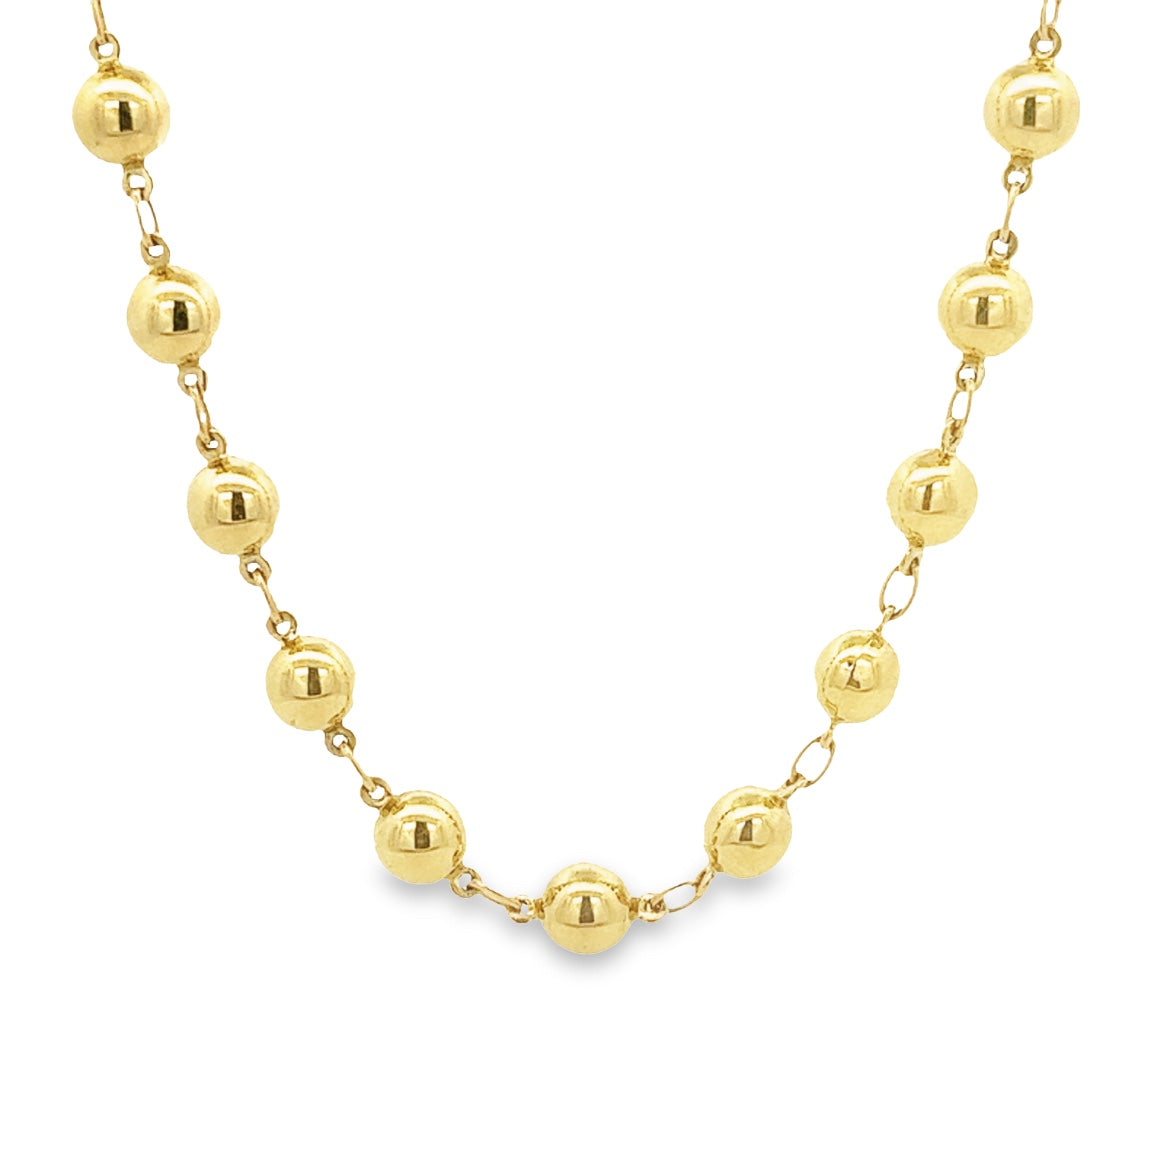 14K GOLD BEAD NECKLACE